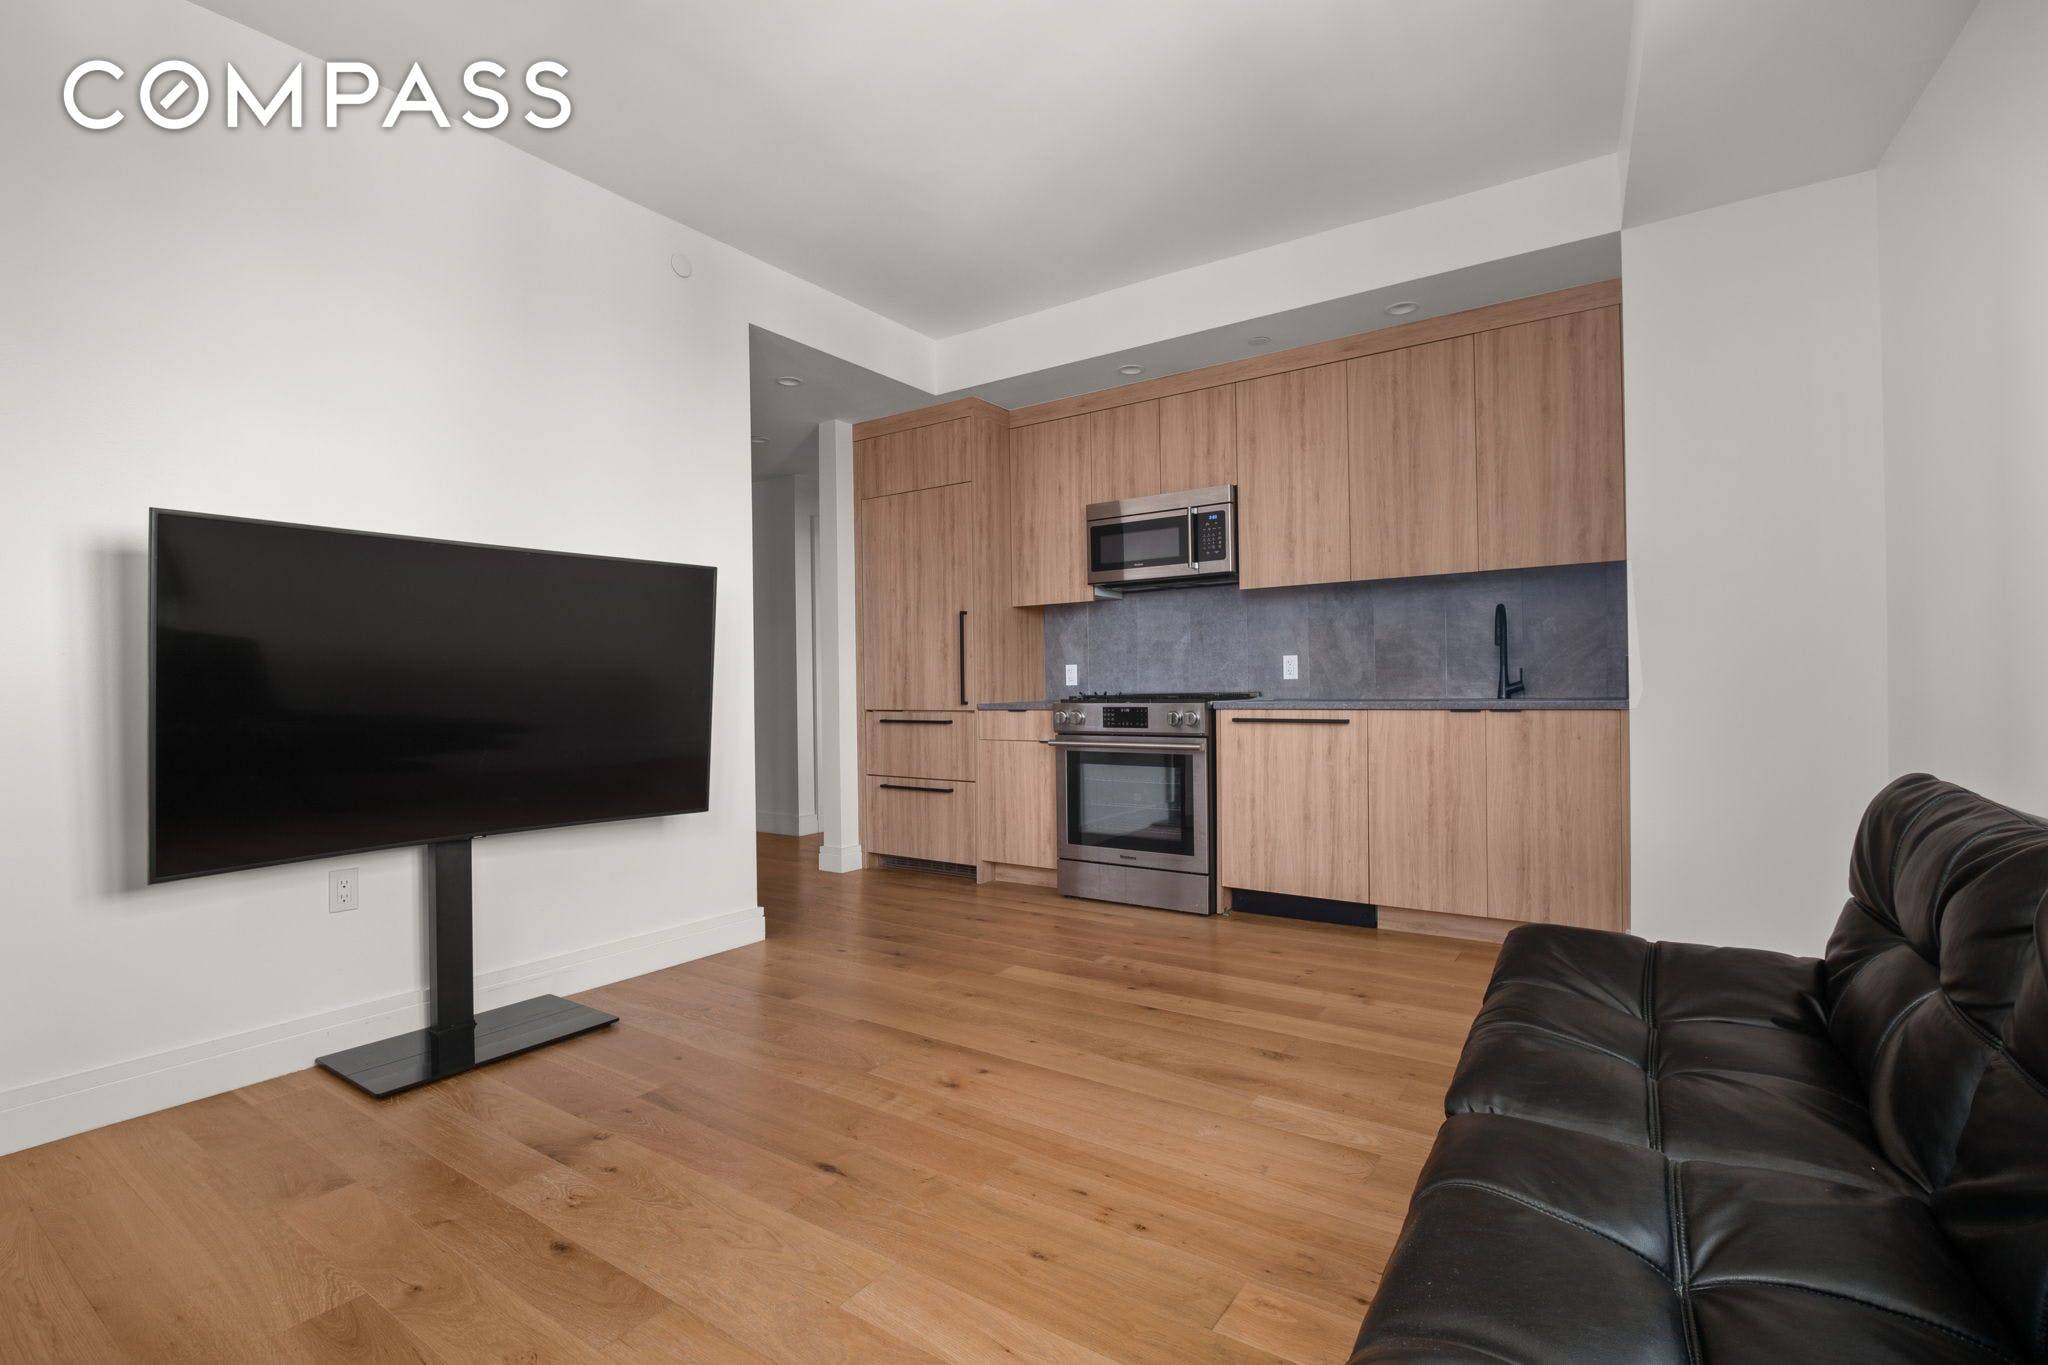 A corner condo unit with sleek finishes and a layout that maximizes space and natural light, this stunning 1 bedroom, 1 bathroom home strikes the perfect balance between tastefulness and ...